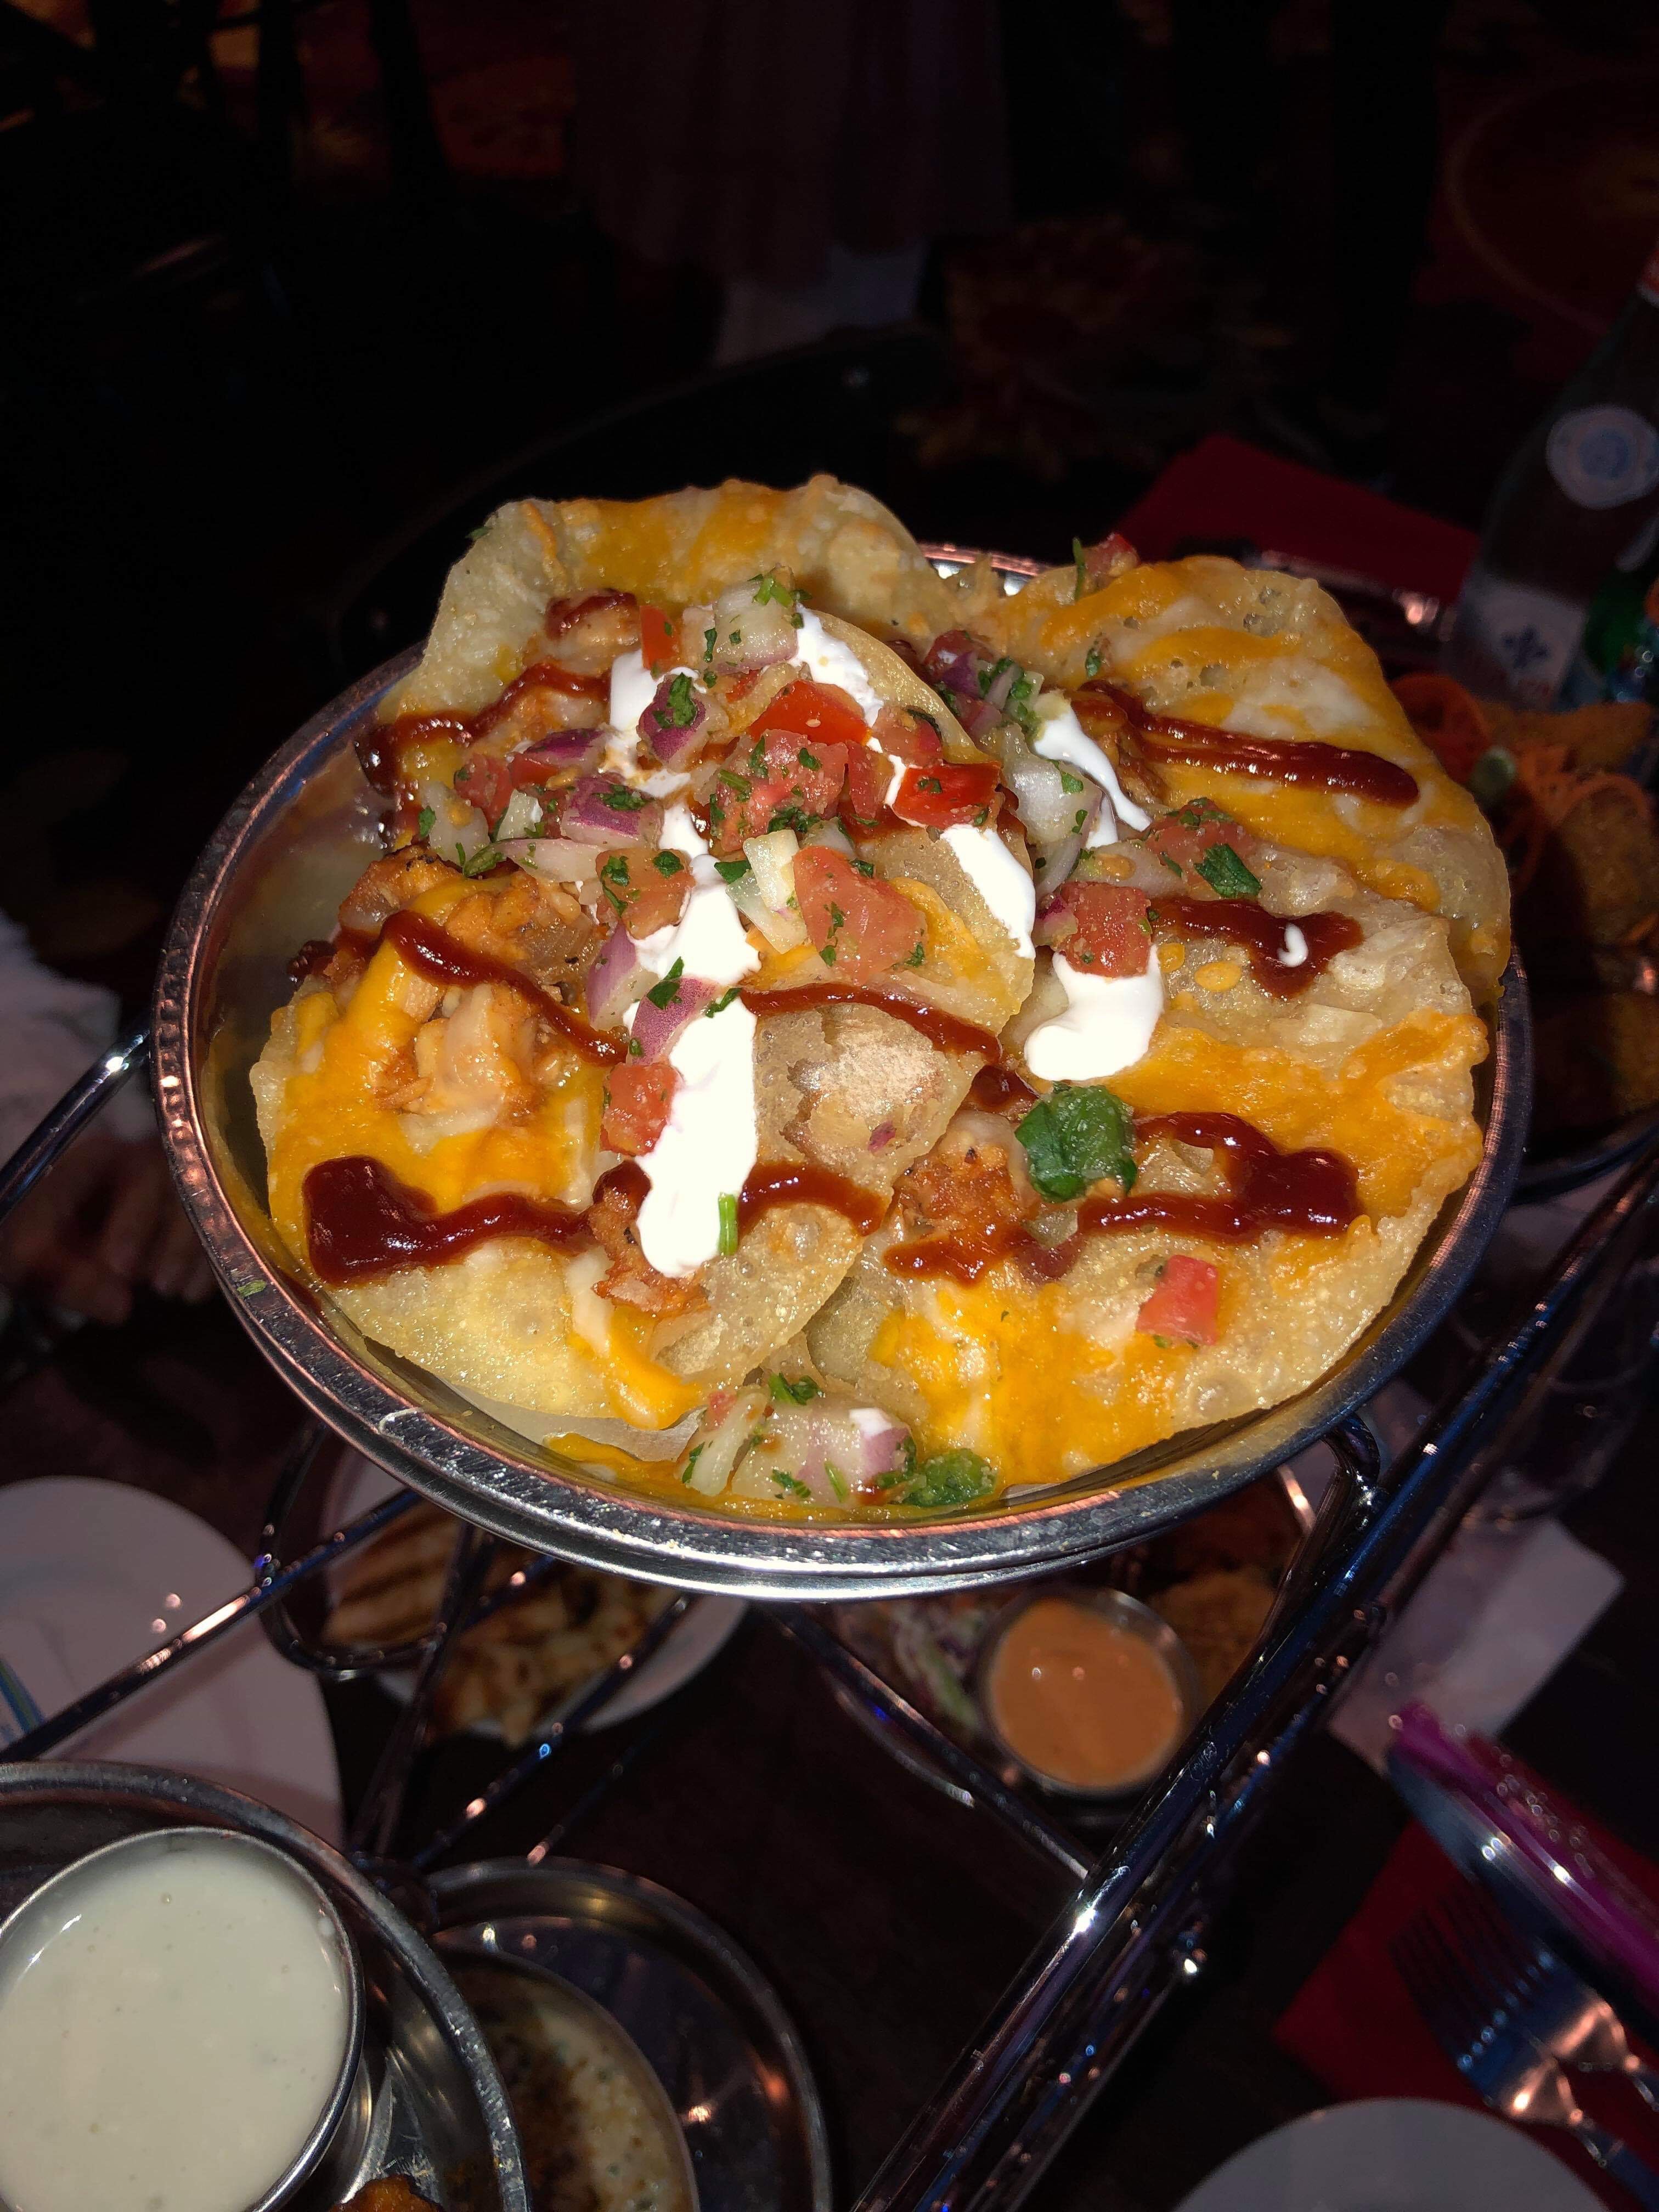 Out of this World Dining Experience at Planet Hollywood